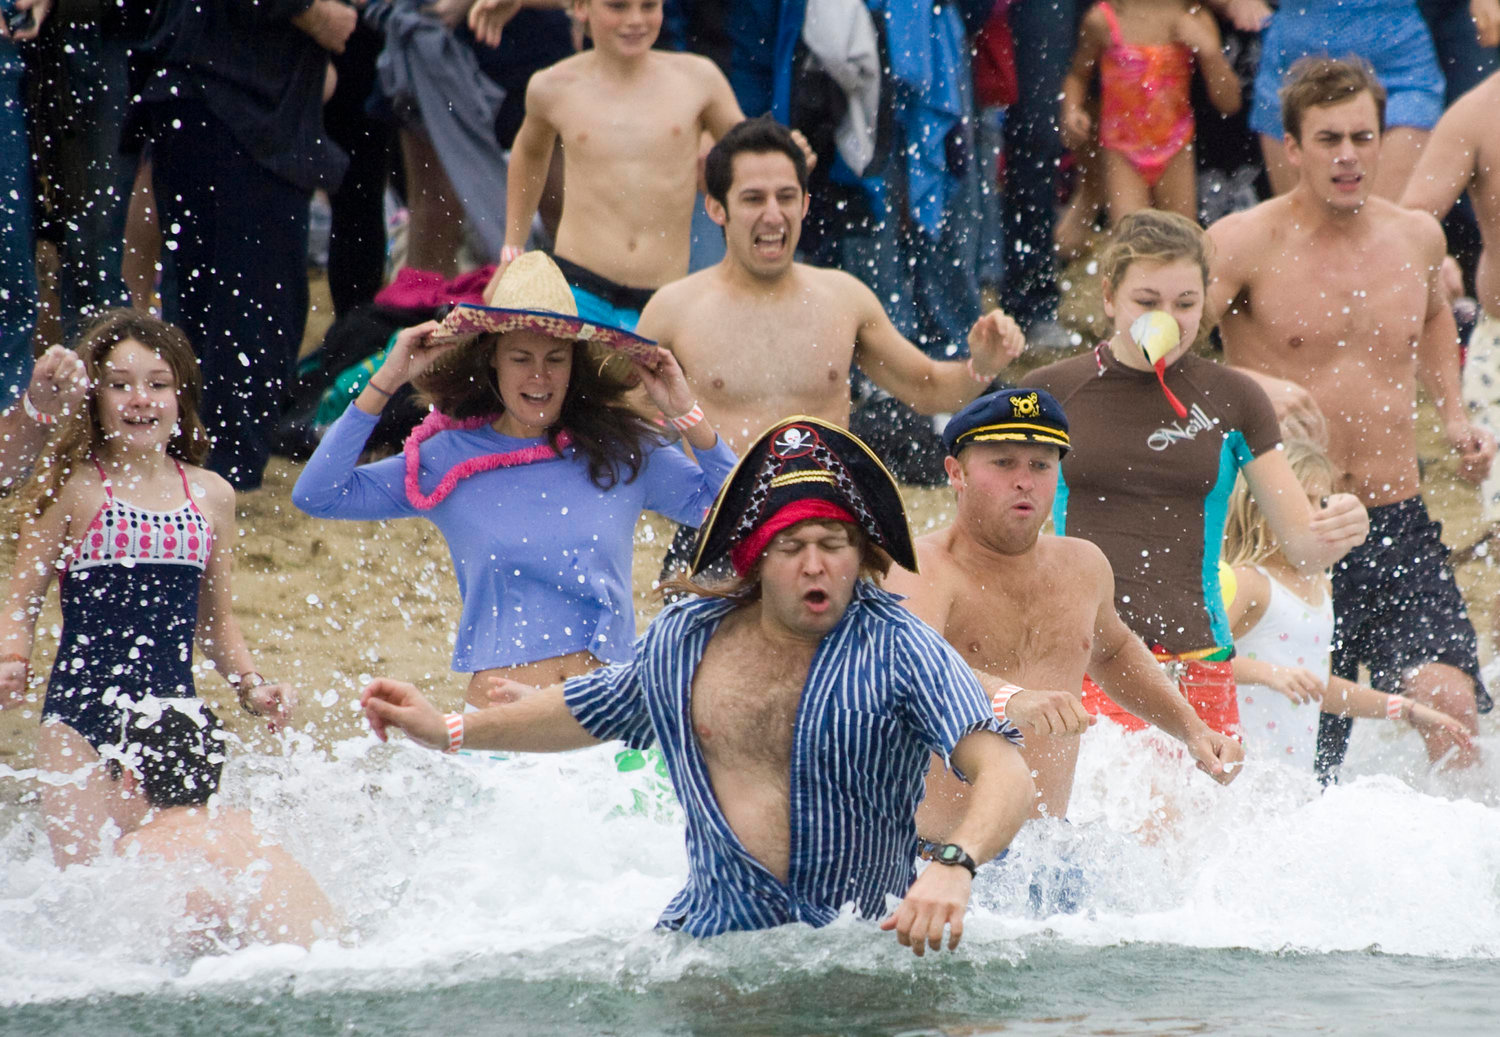 Costumes are encouraged at the Atheneum's Cold Turkey Plunge.